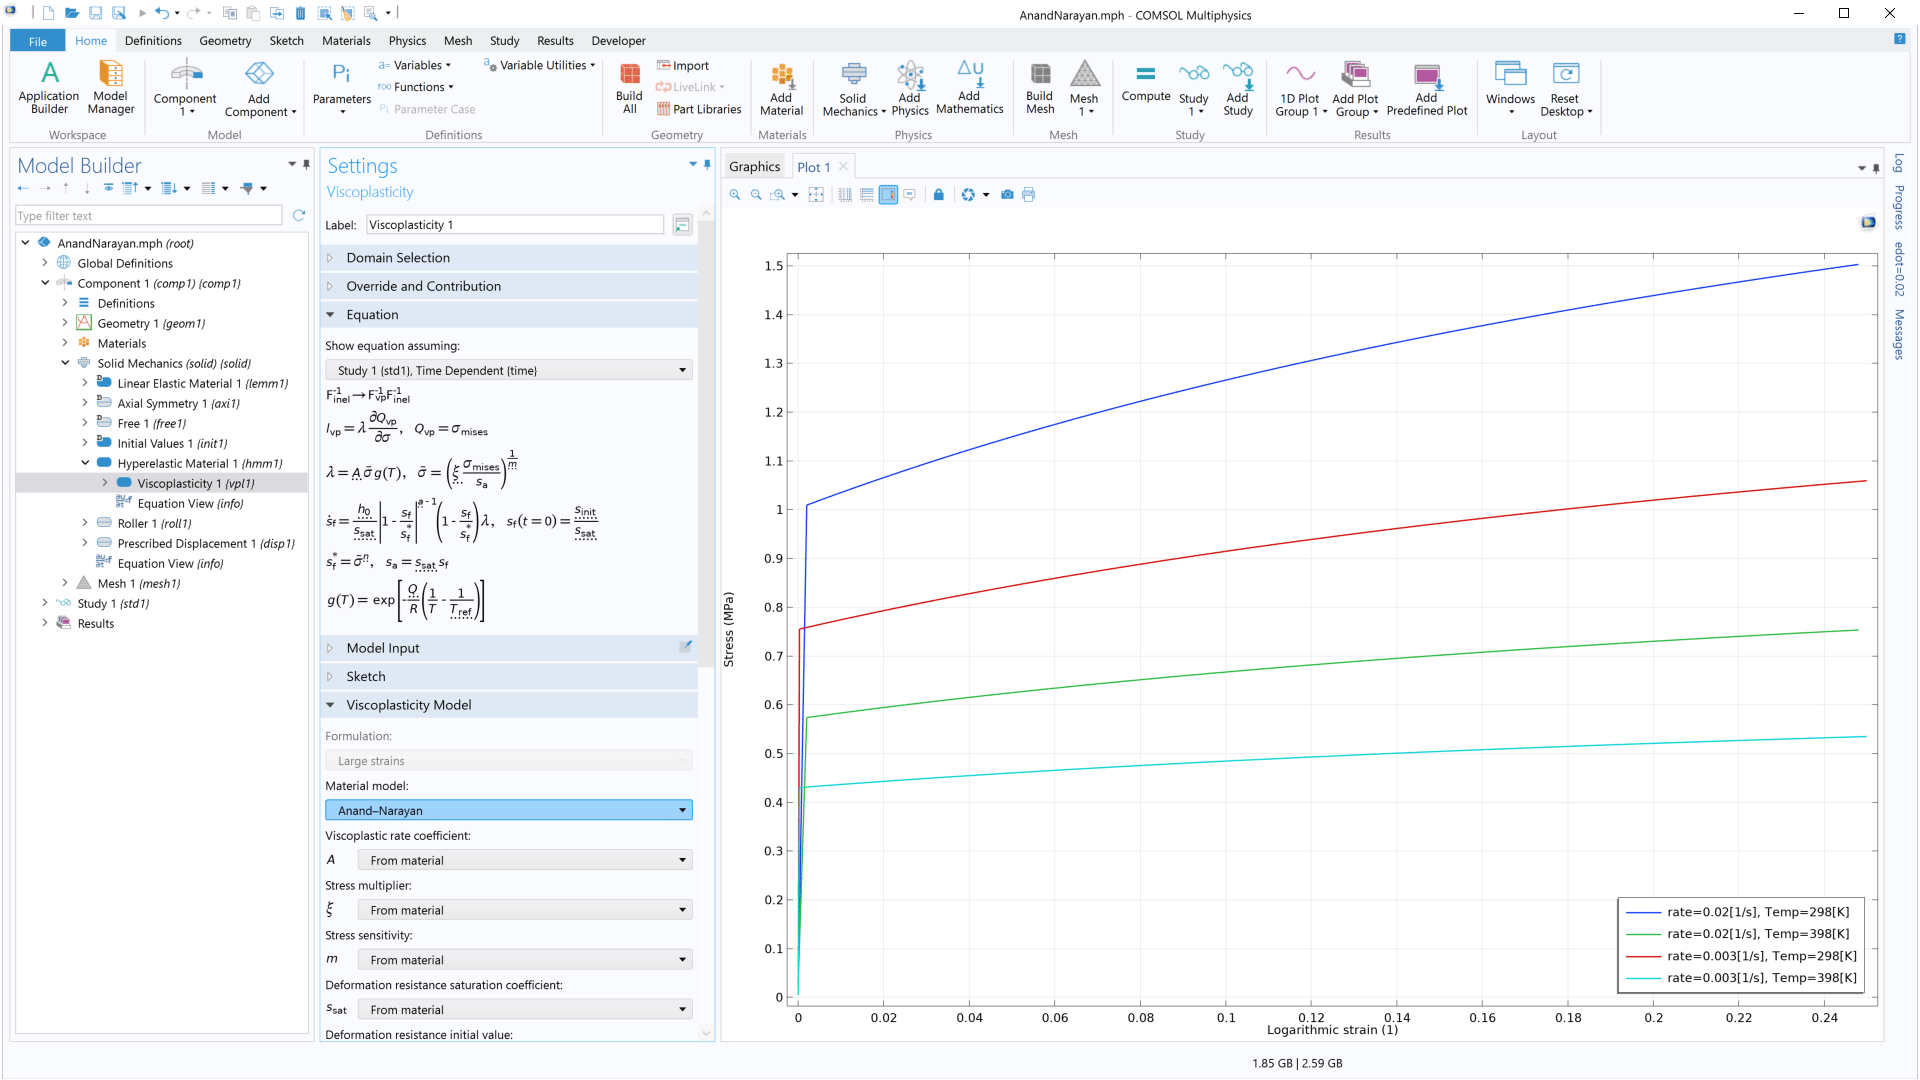 The COMSOL Multiphysics UI showing the Model Builder with the Viscoplasticity node highlighted, the corresponding Settings window, and a 1D plot in the Graphics window.